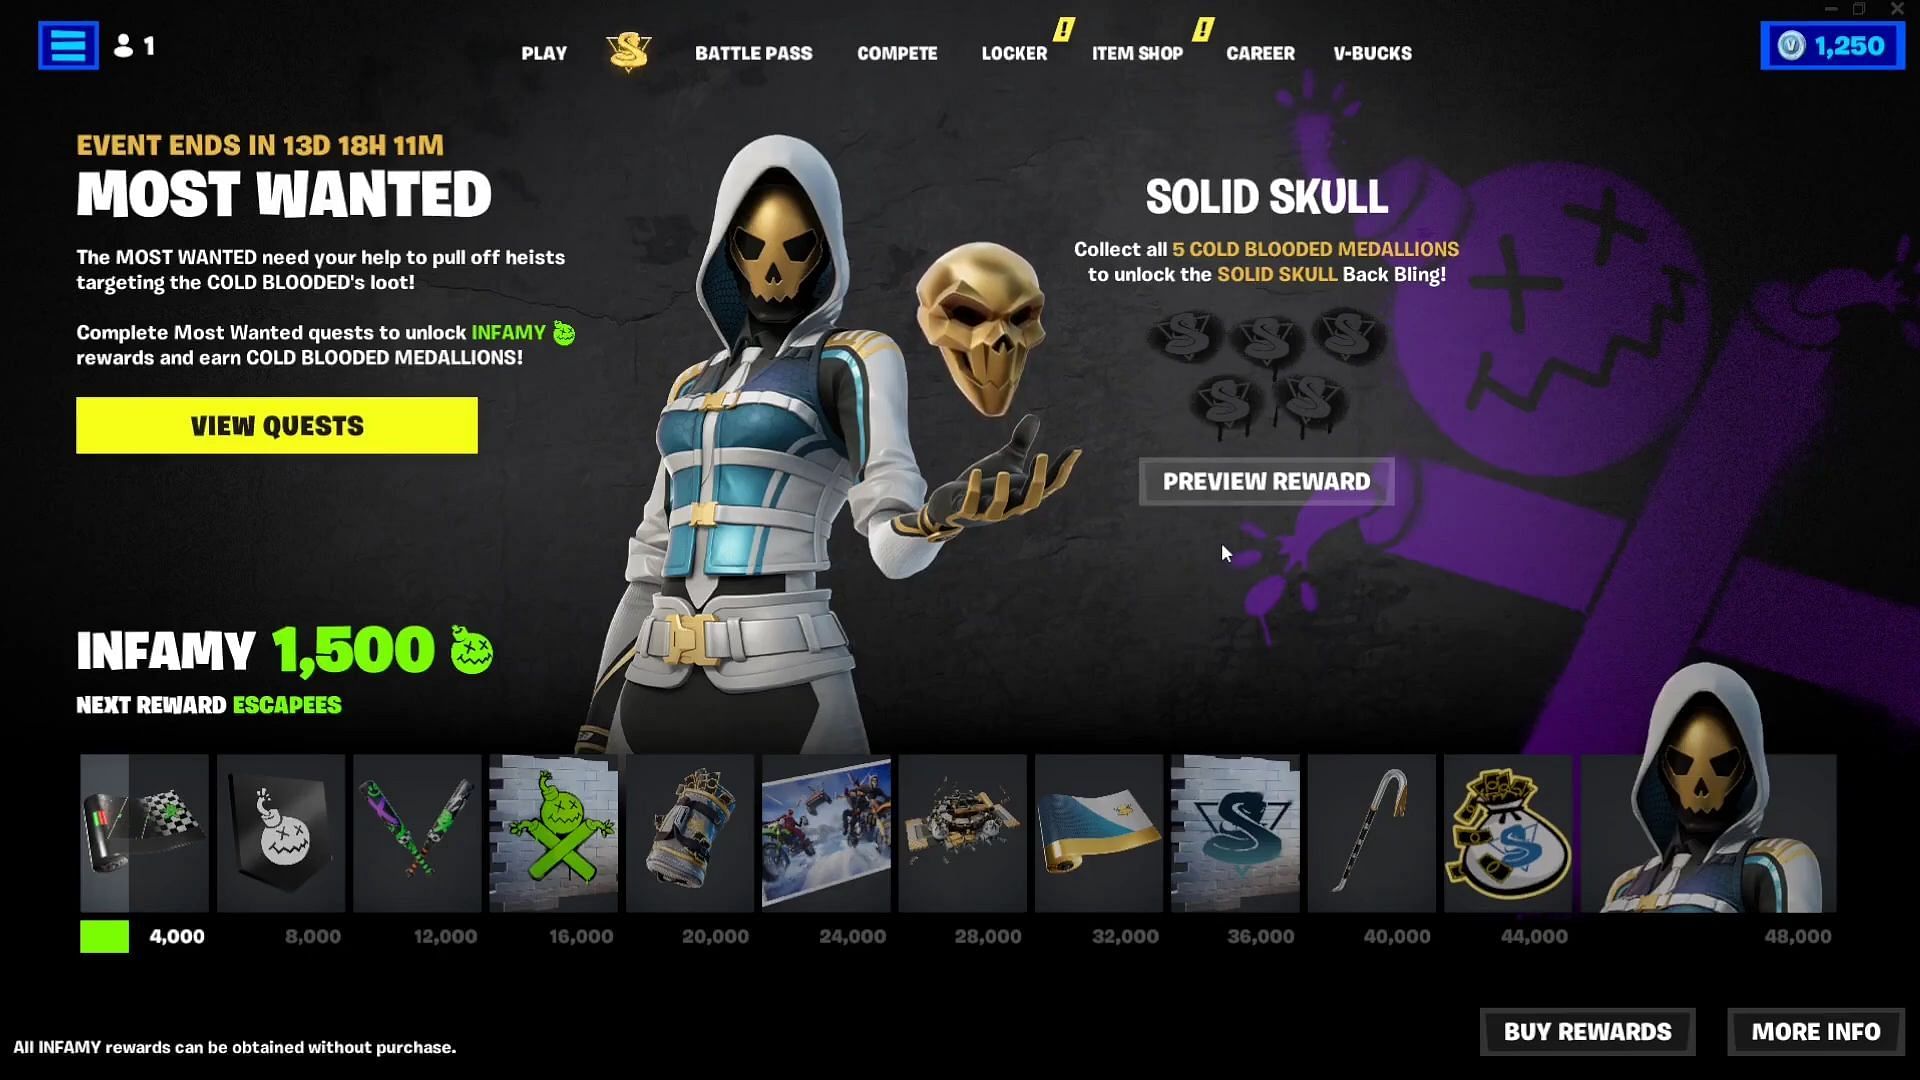 The Solid Skull back bling can be unlocked through the Most Wanted event (Image via Epic Games)